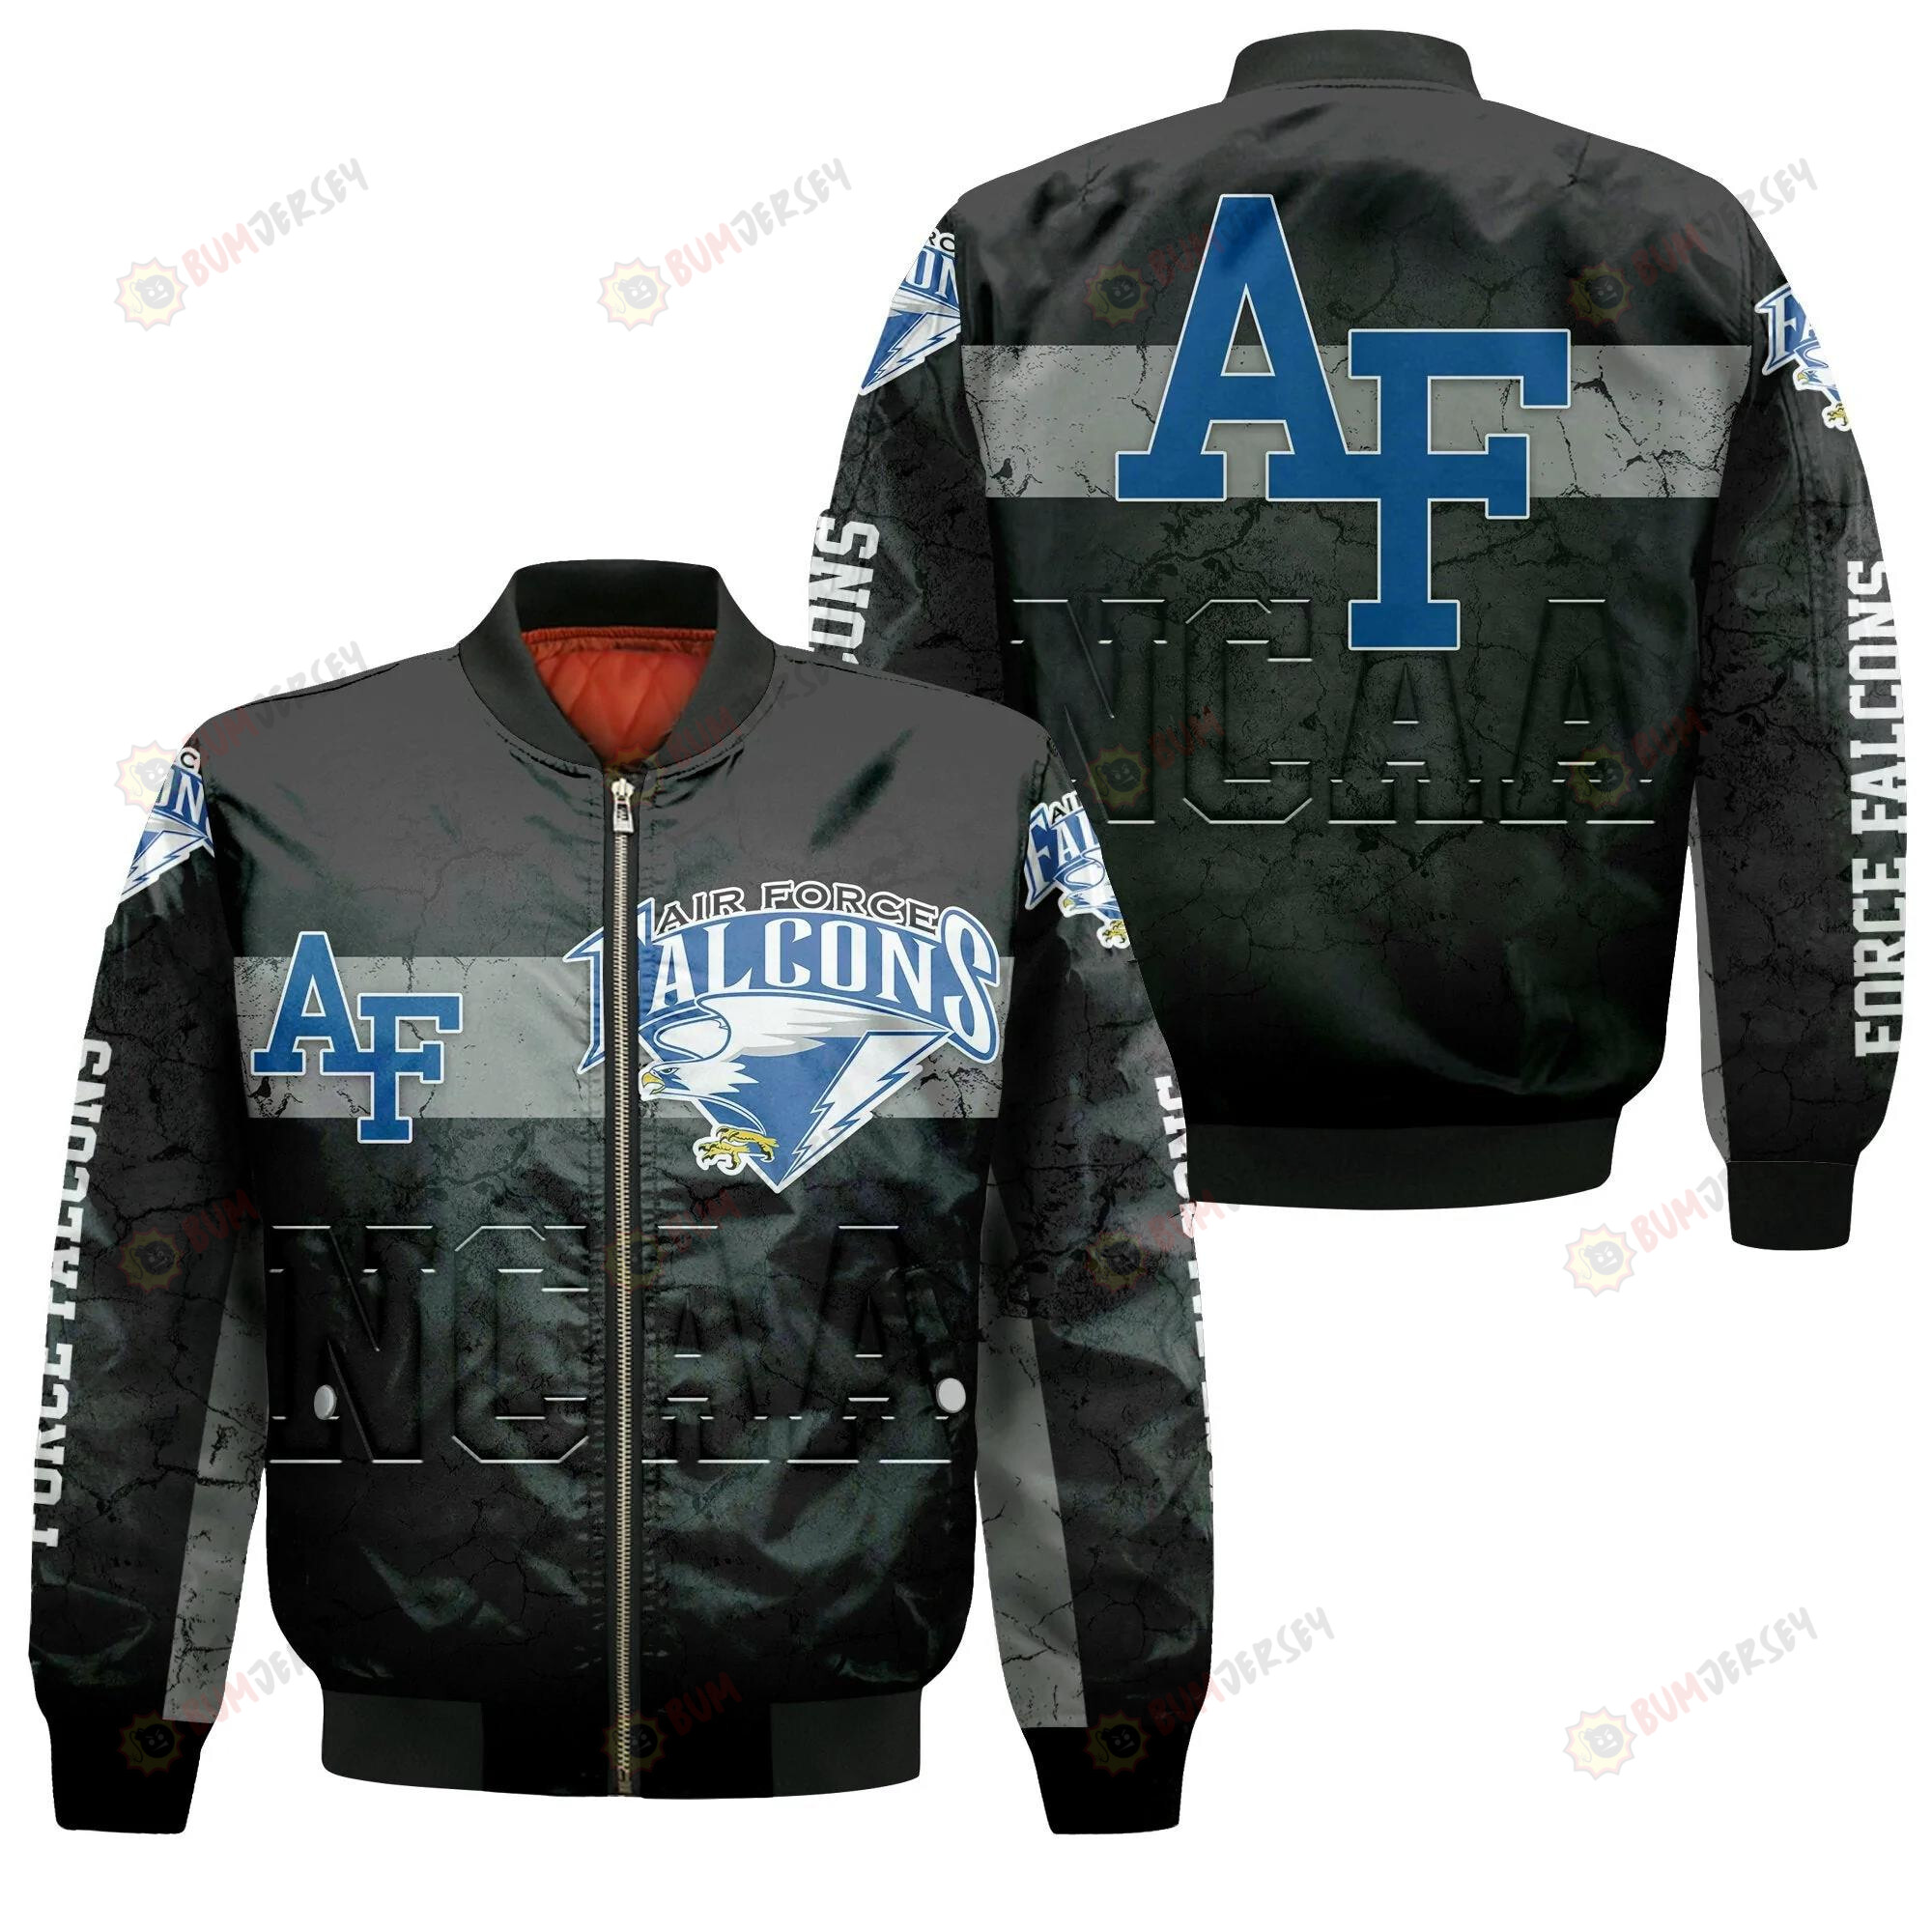 Air Force Falcons Bomber Jacket 3D Printed - Champion Legendary